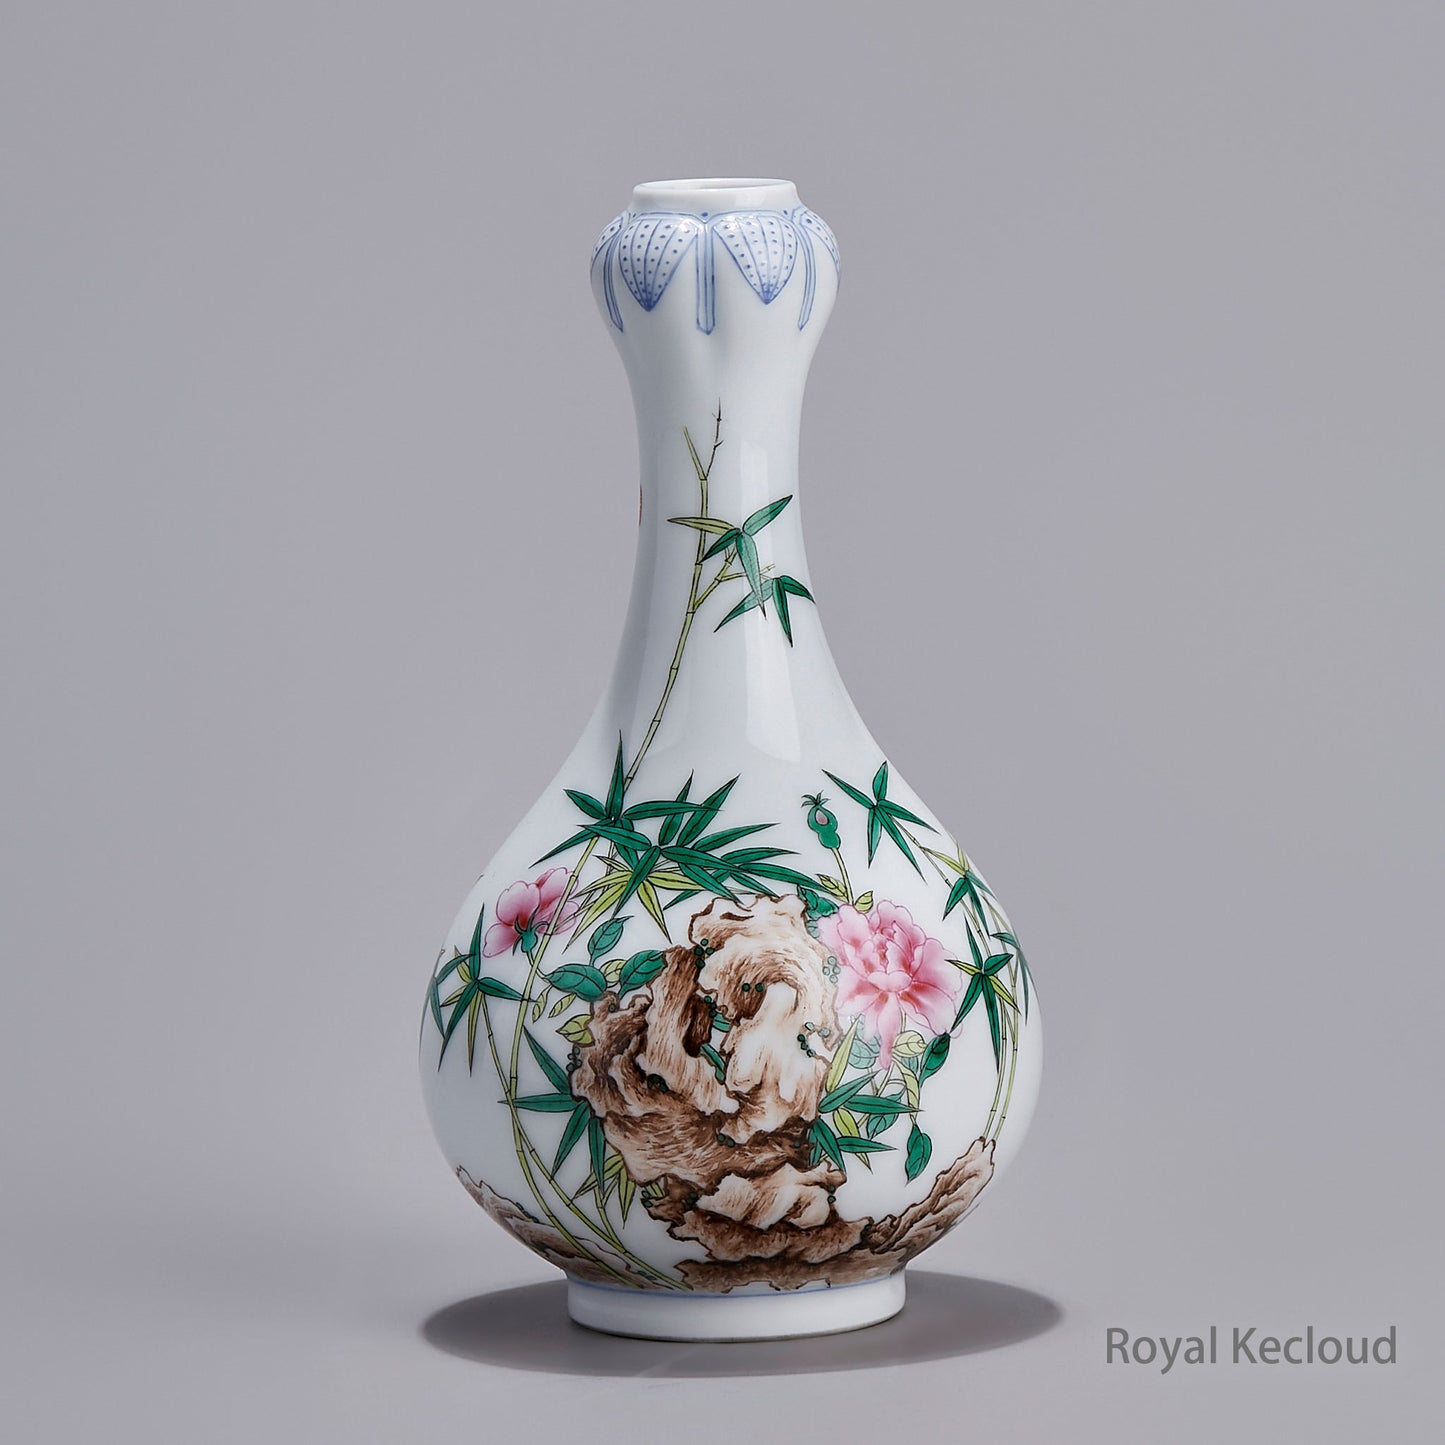 Jingdezhen Handmade Garlic-Mouth Porcelain Vase with Flower and Bamboo